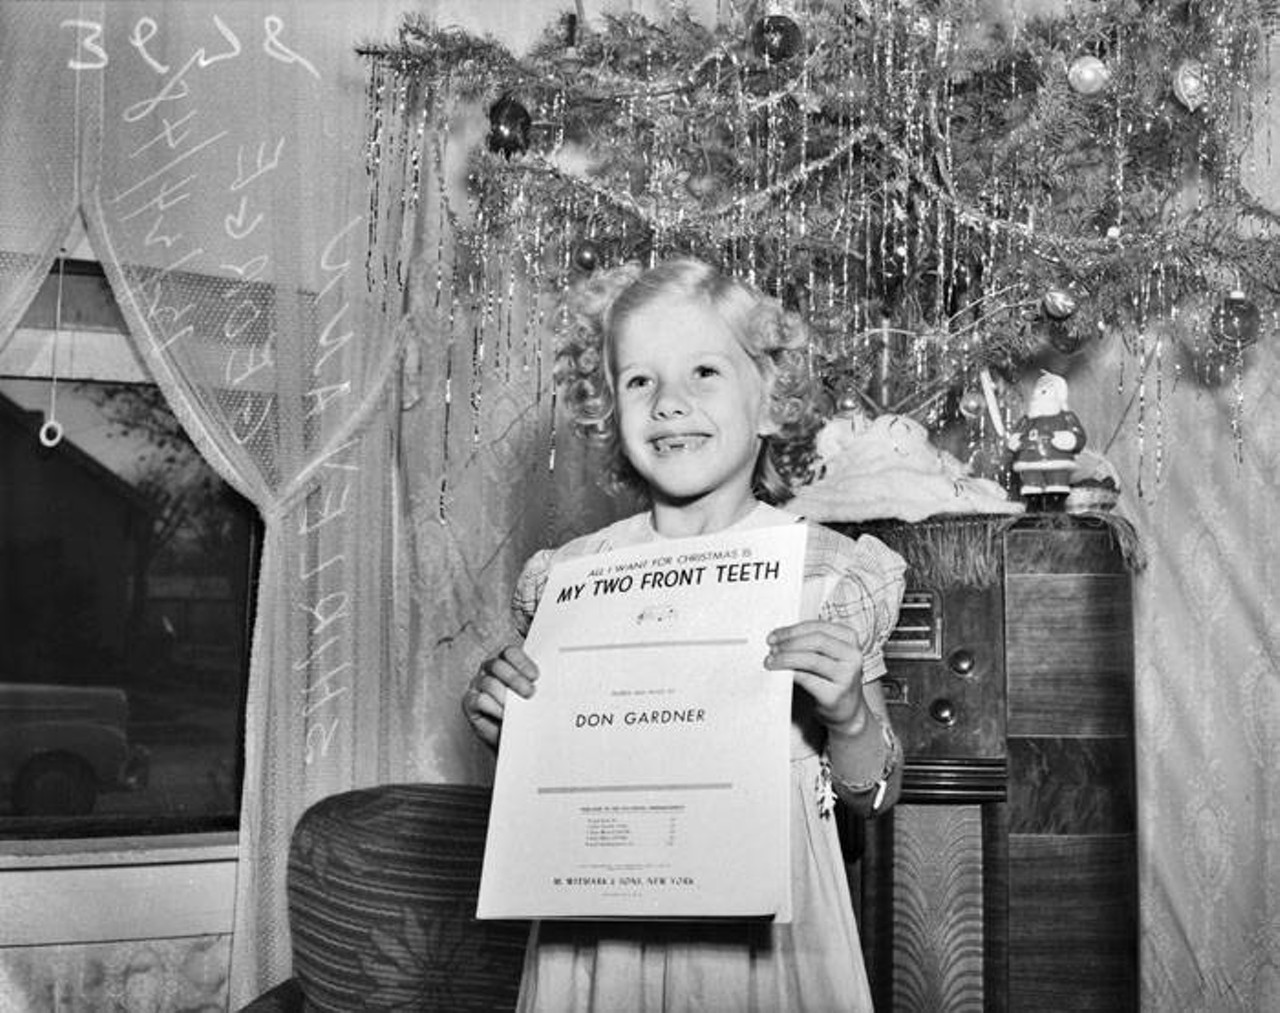 Shirley Ann George showed off her missing two front teeth — just like the song! — for the San Antonio Light in 1948. According to the paper, she was '"practicing the song for Santa Claus' visit."